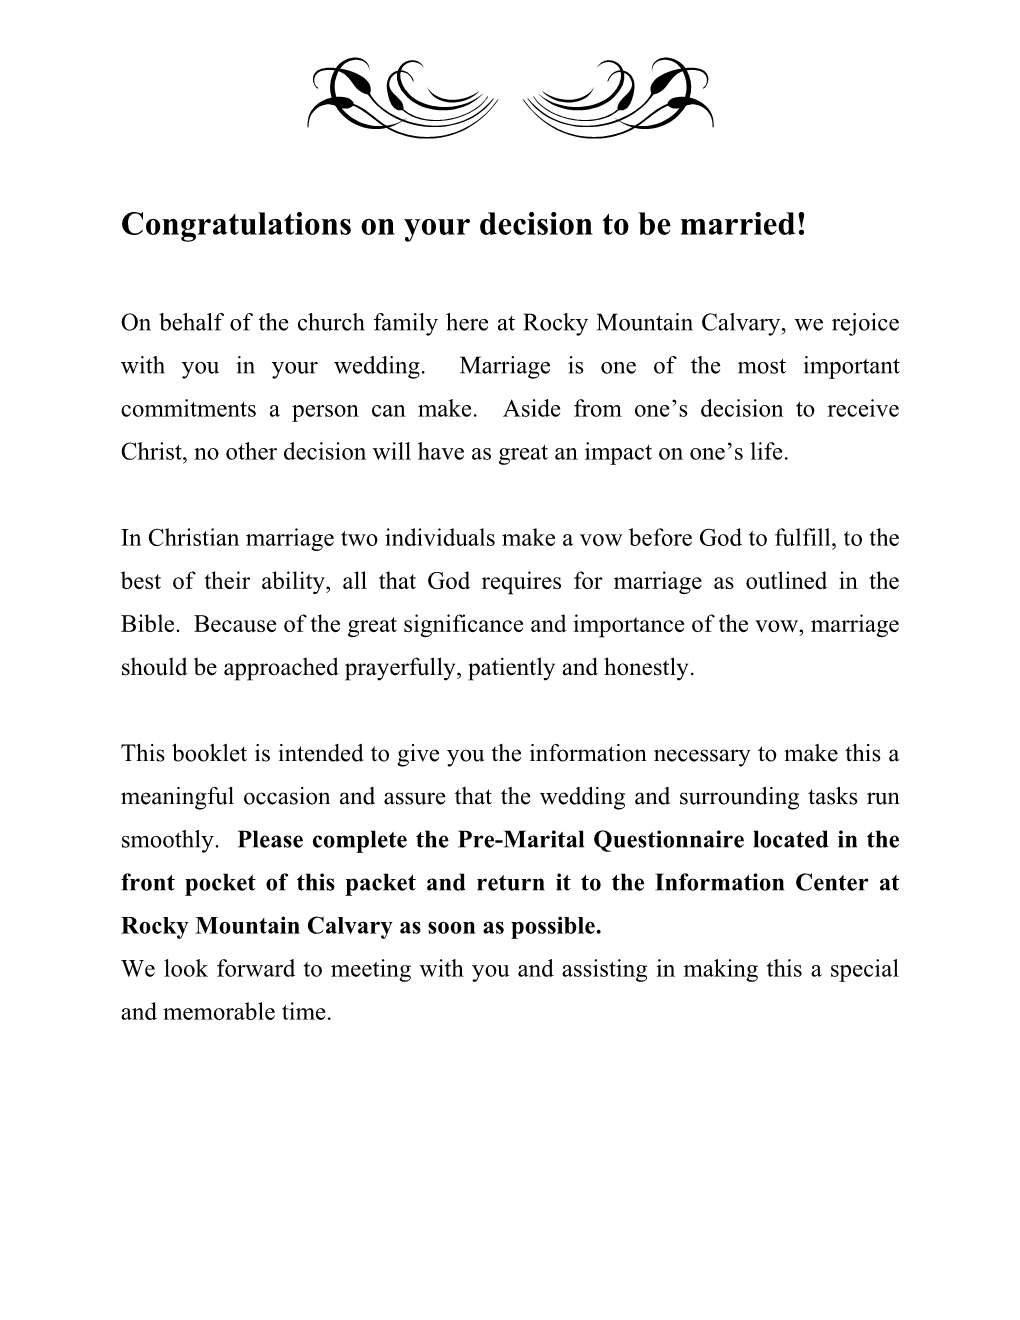 Congratulations on Your Decision to Be Married!